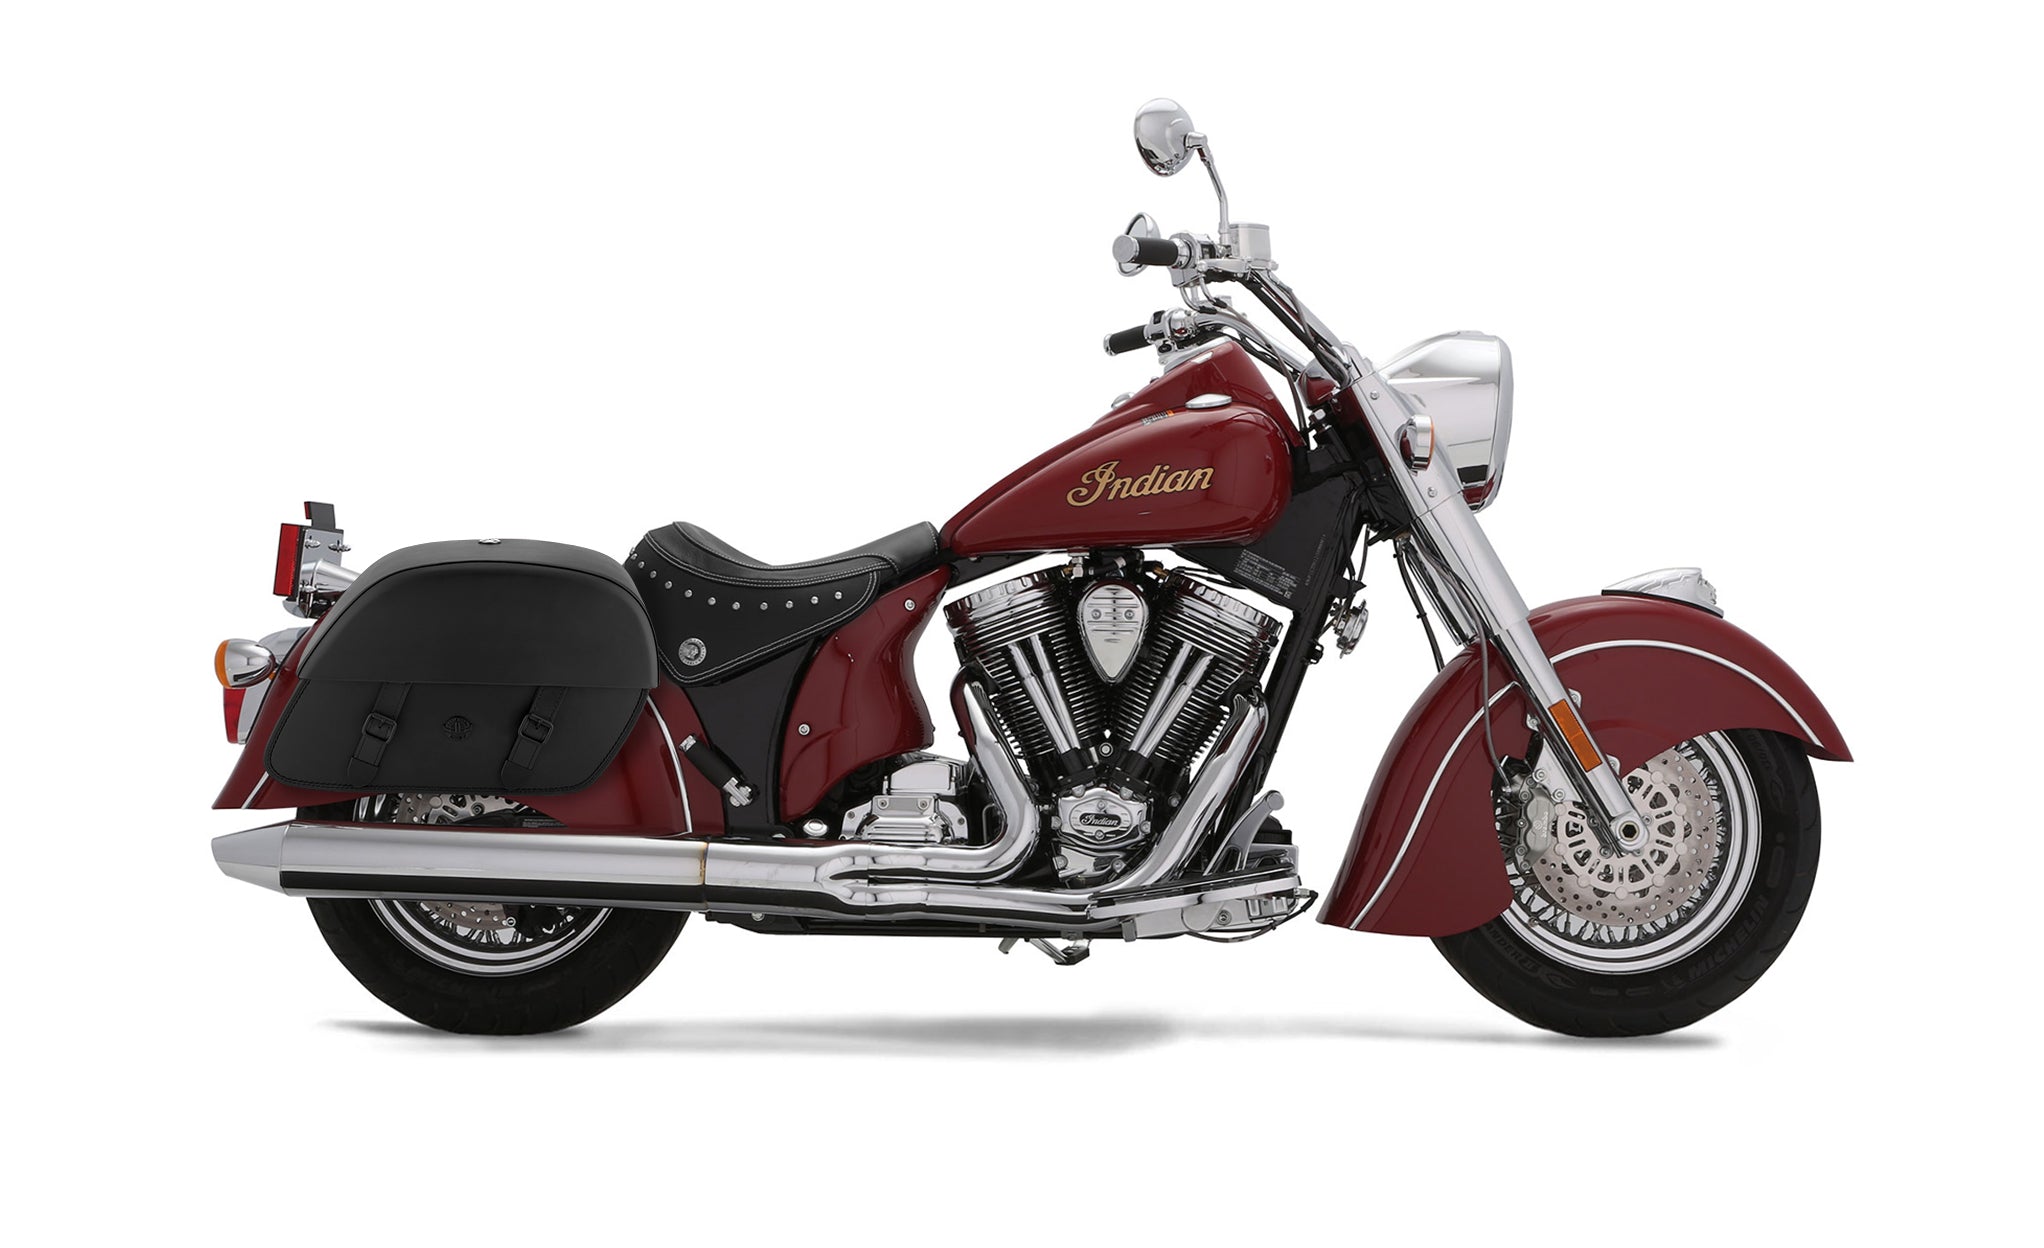 Viking Baelor Large Indian Chief Deluxe Leather Motorcycle Saddlebags on Bike Photo @expand